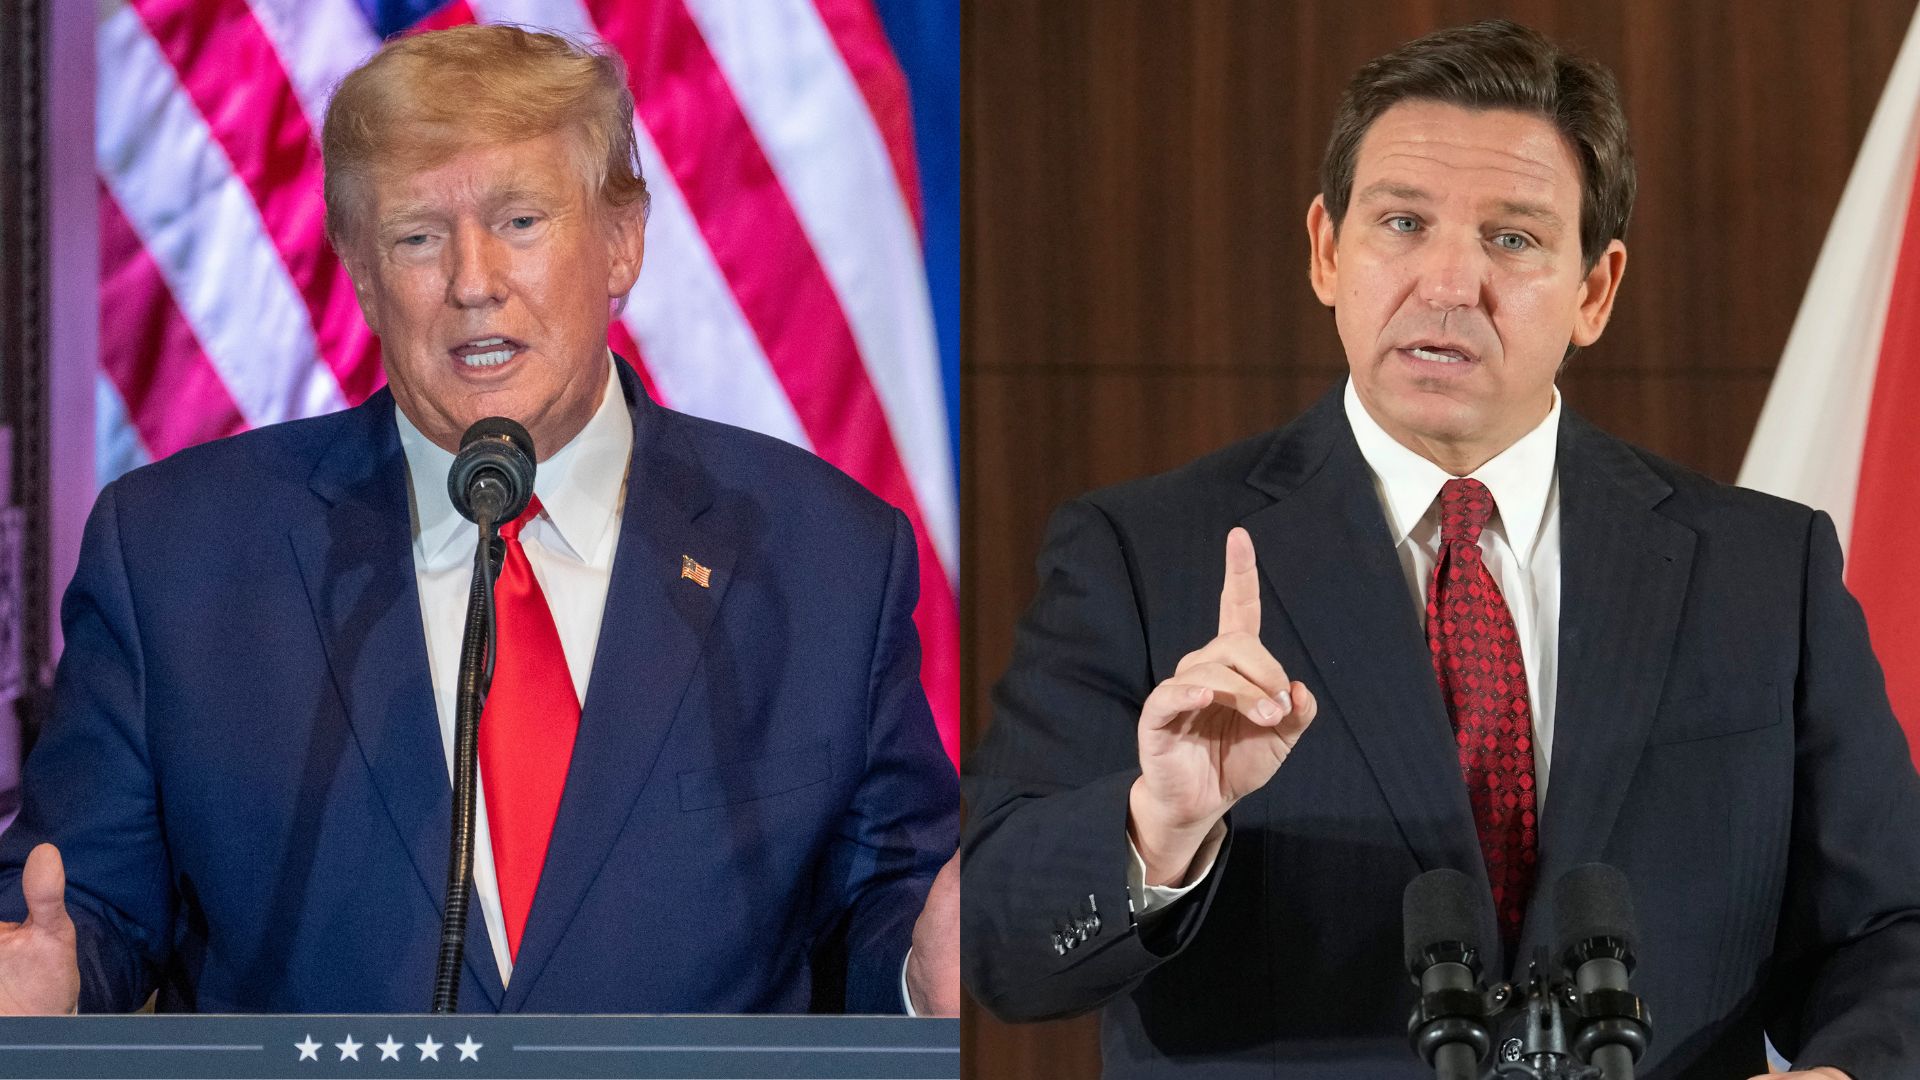 Trump Goes Scorched Earth on DeSantis, Raises Questions About His Sexuality and Peddles Groomer Smear